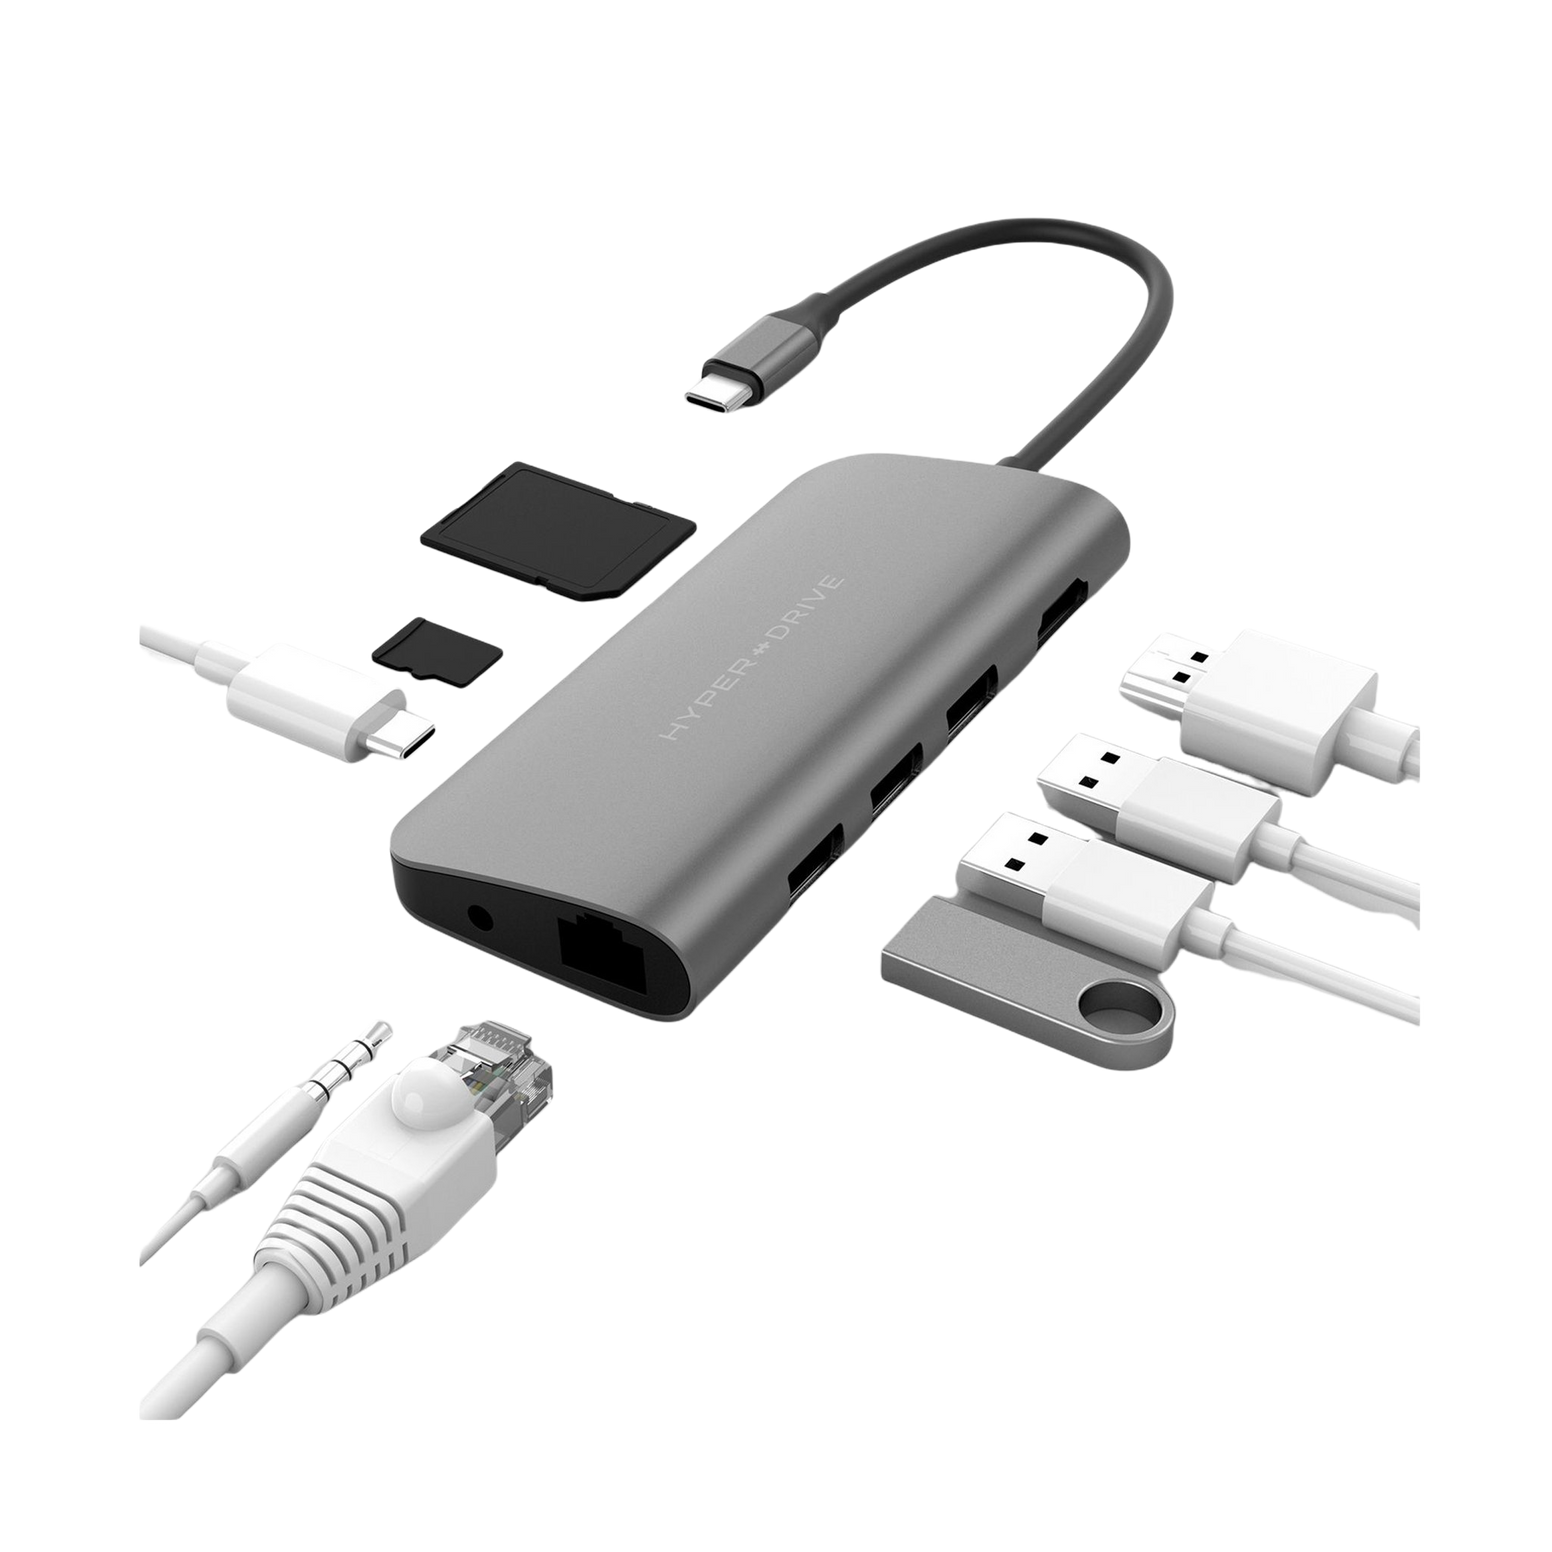 HyperDrive Power 9-in-1 USB Type-C Hub - Space Grey - Discontinued